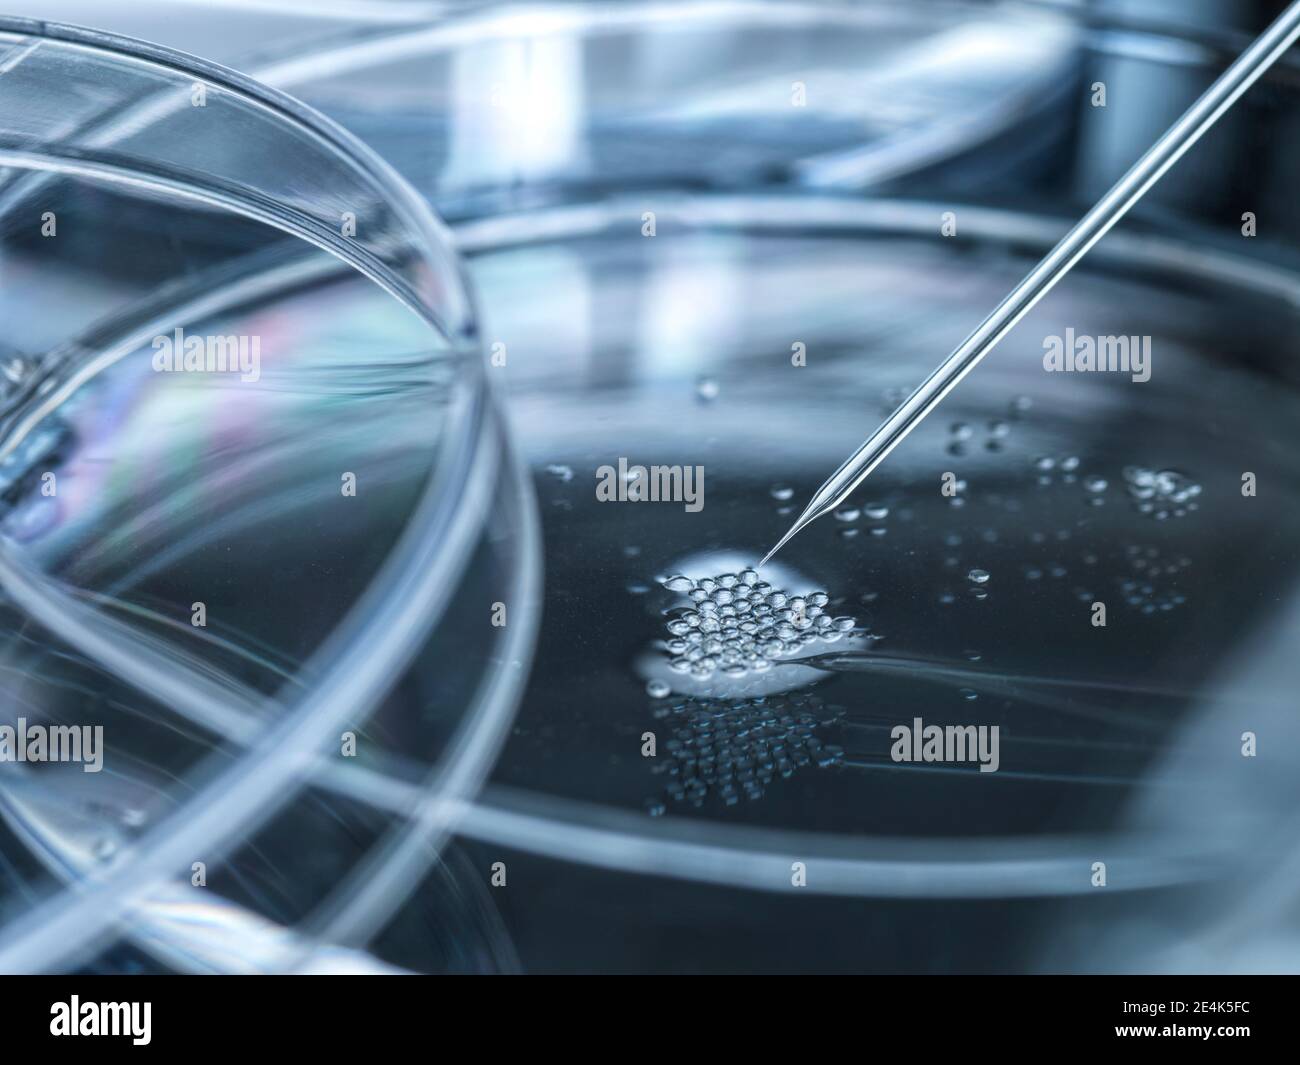 Petri dish with embryonic stem cells used in cloning and genetic modification Stock Photo